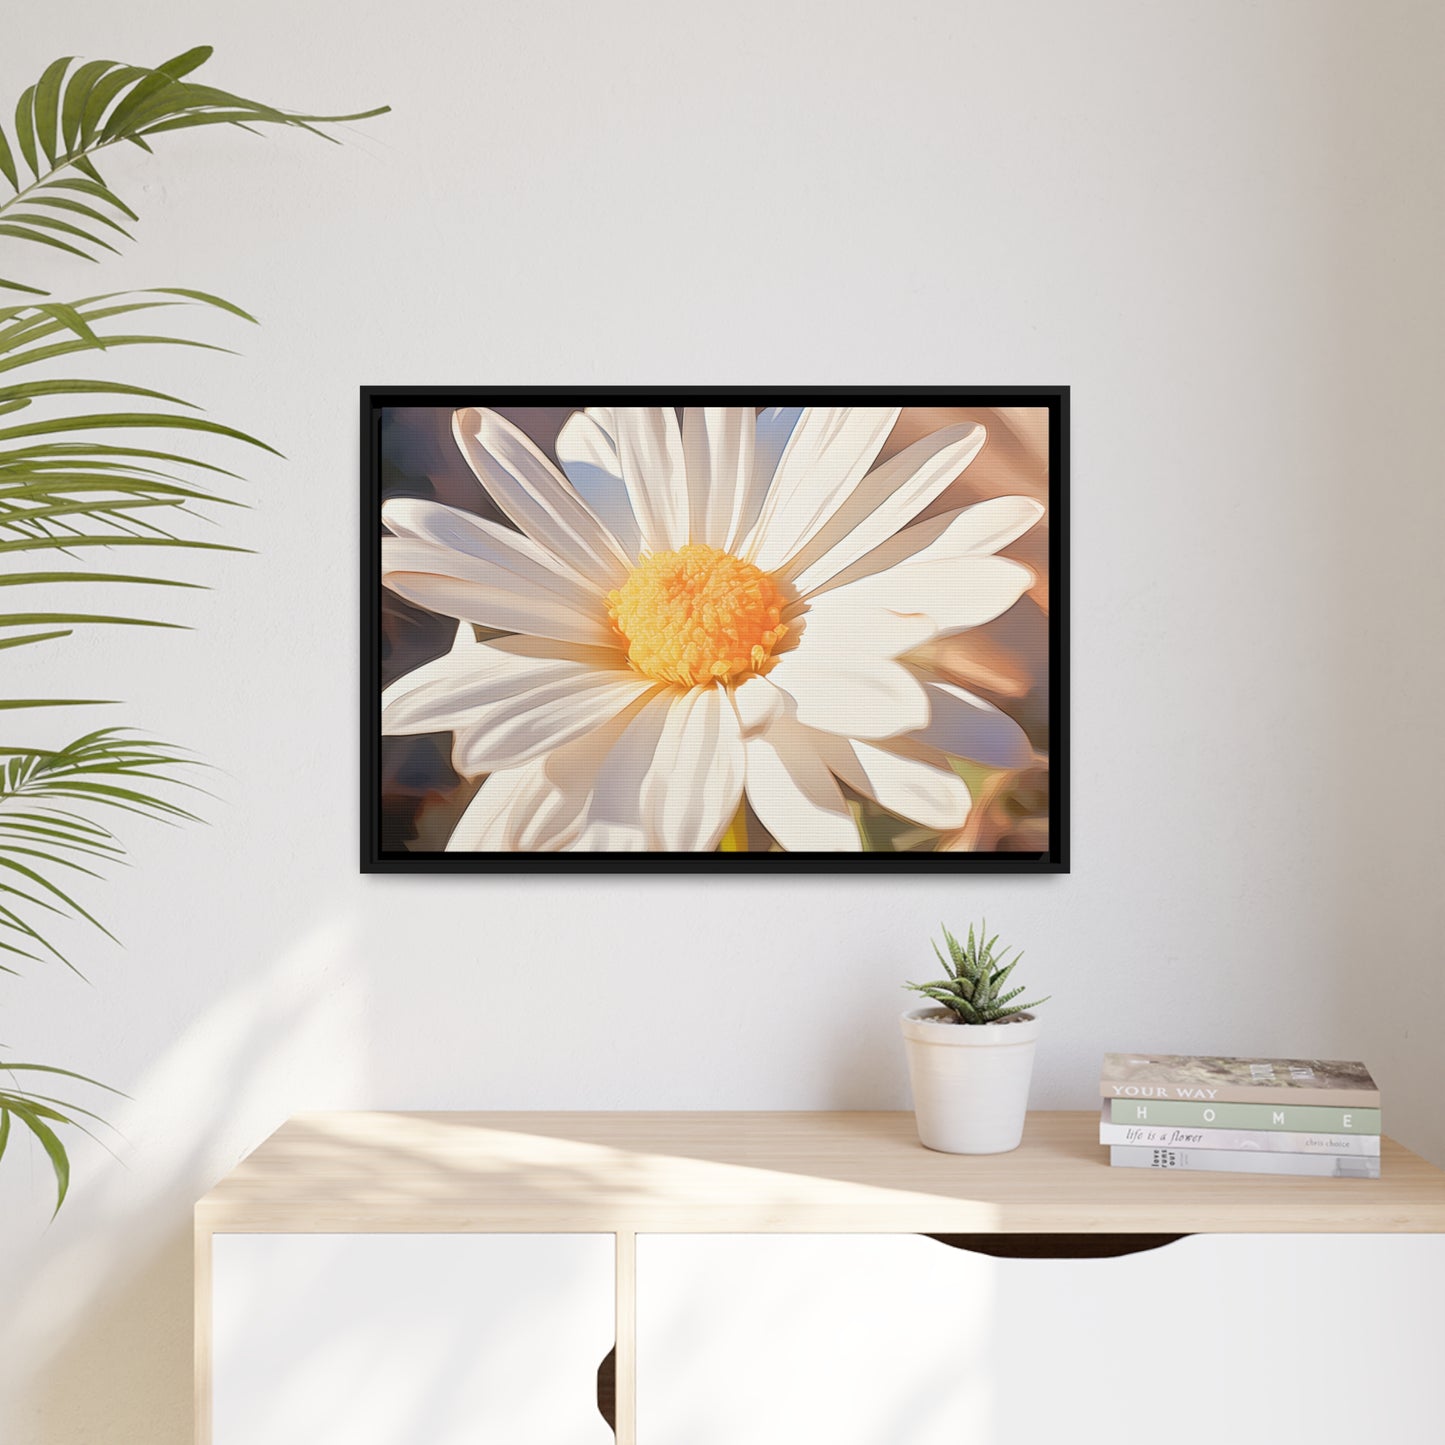 Framed Canvas Nature Inspired Artwork Stunning Sunlit Daisy Blooming Oil Painting Style